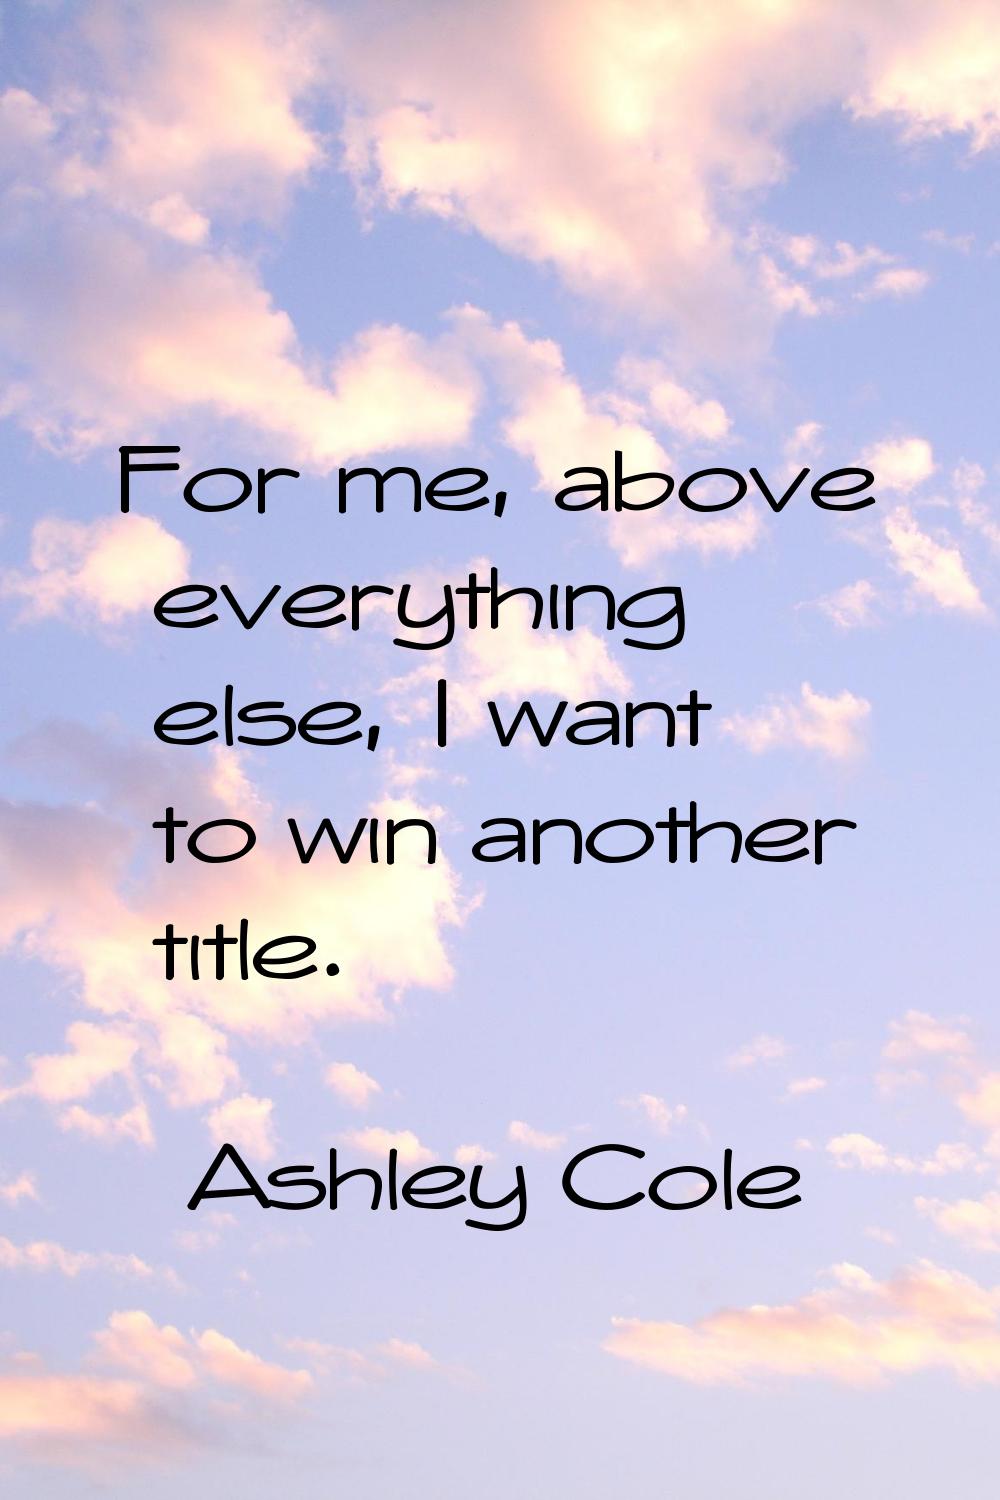 For me, above everything else, I want to win another title.